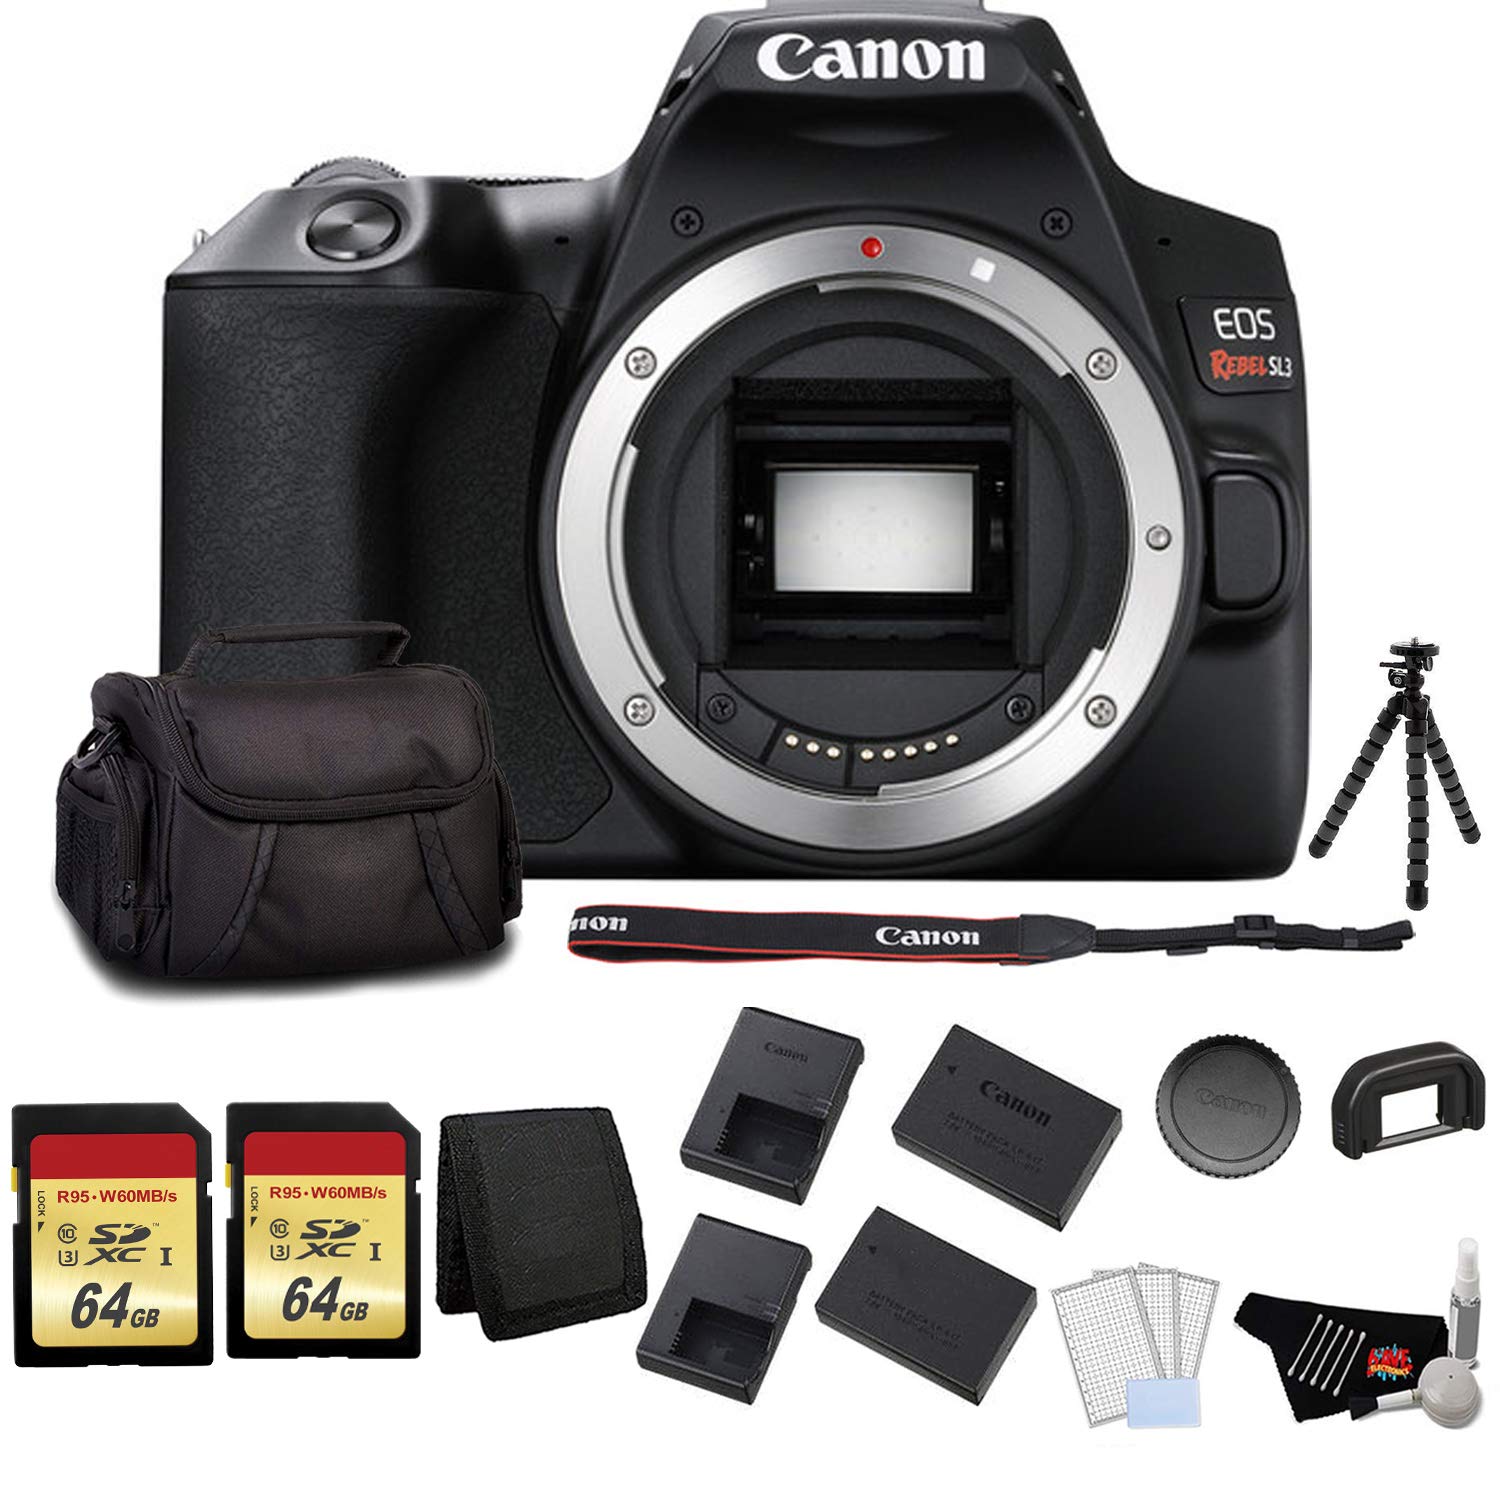 Canon EOS Rebel SL3 DSLR Camera (Black, Body Only) Bundle with 2x64GB Memory Card + Battery for CanonLPE17 + LCD Screen